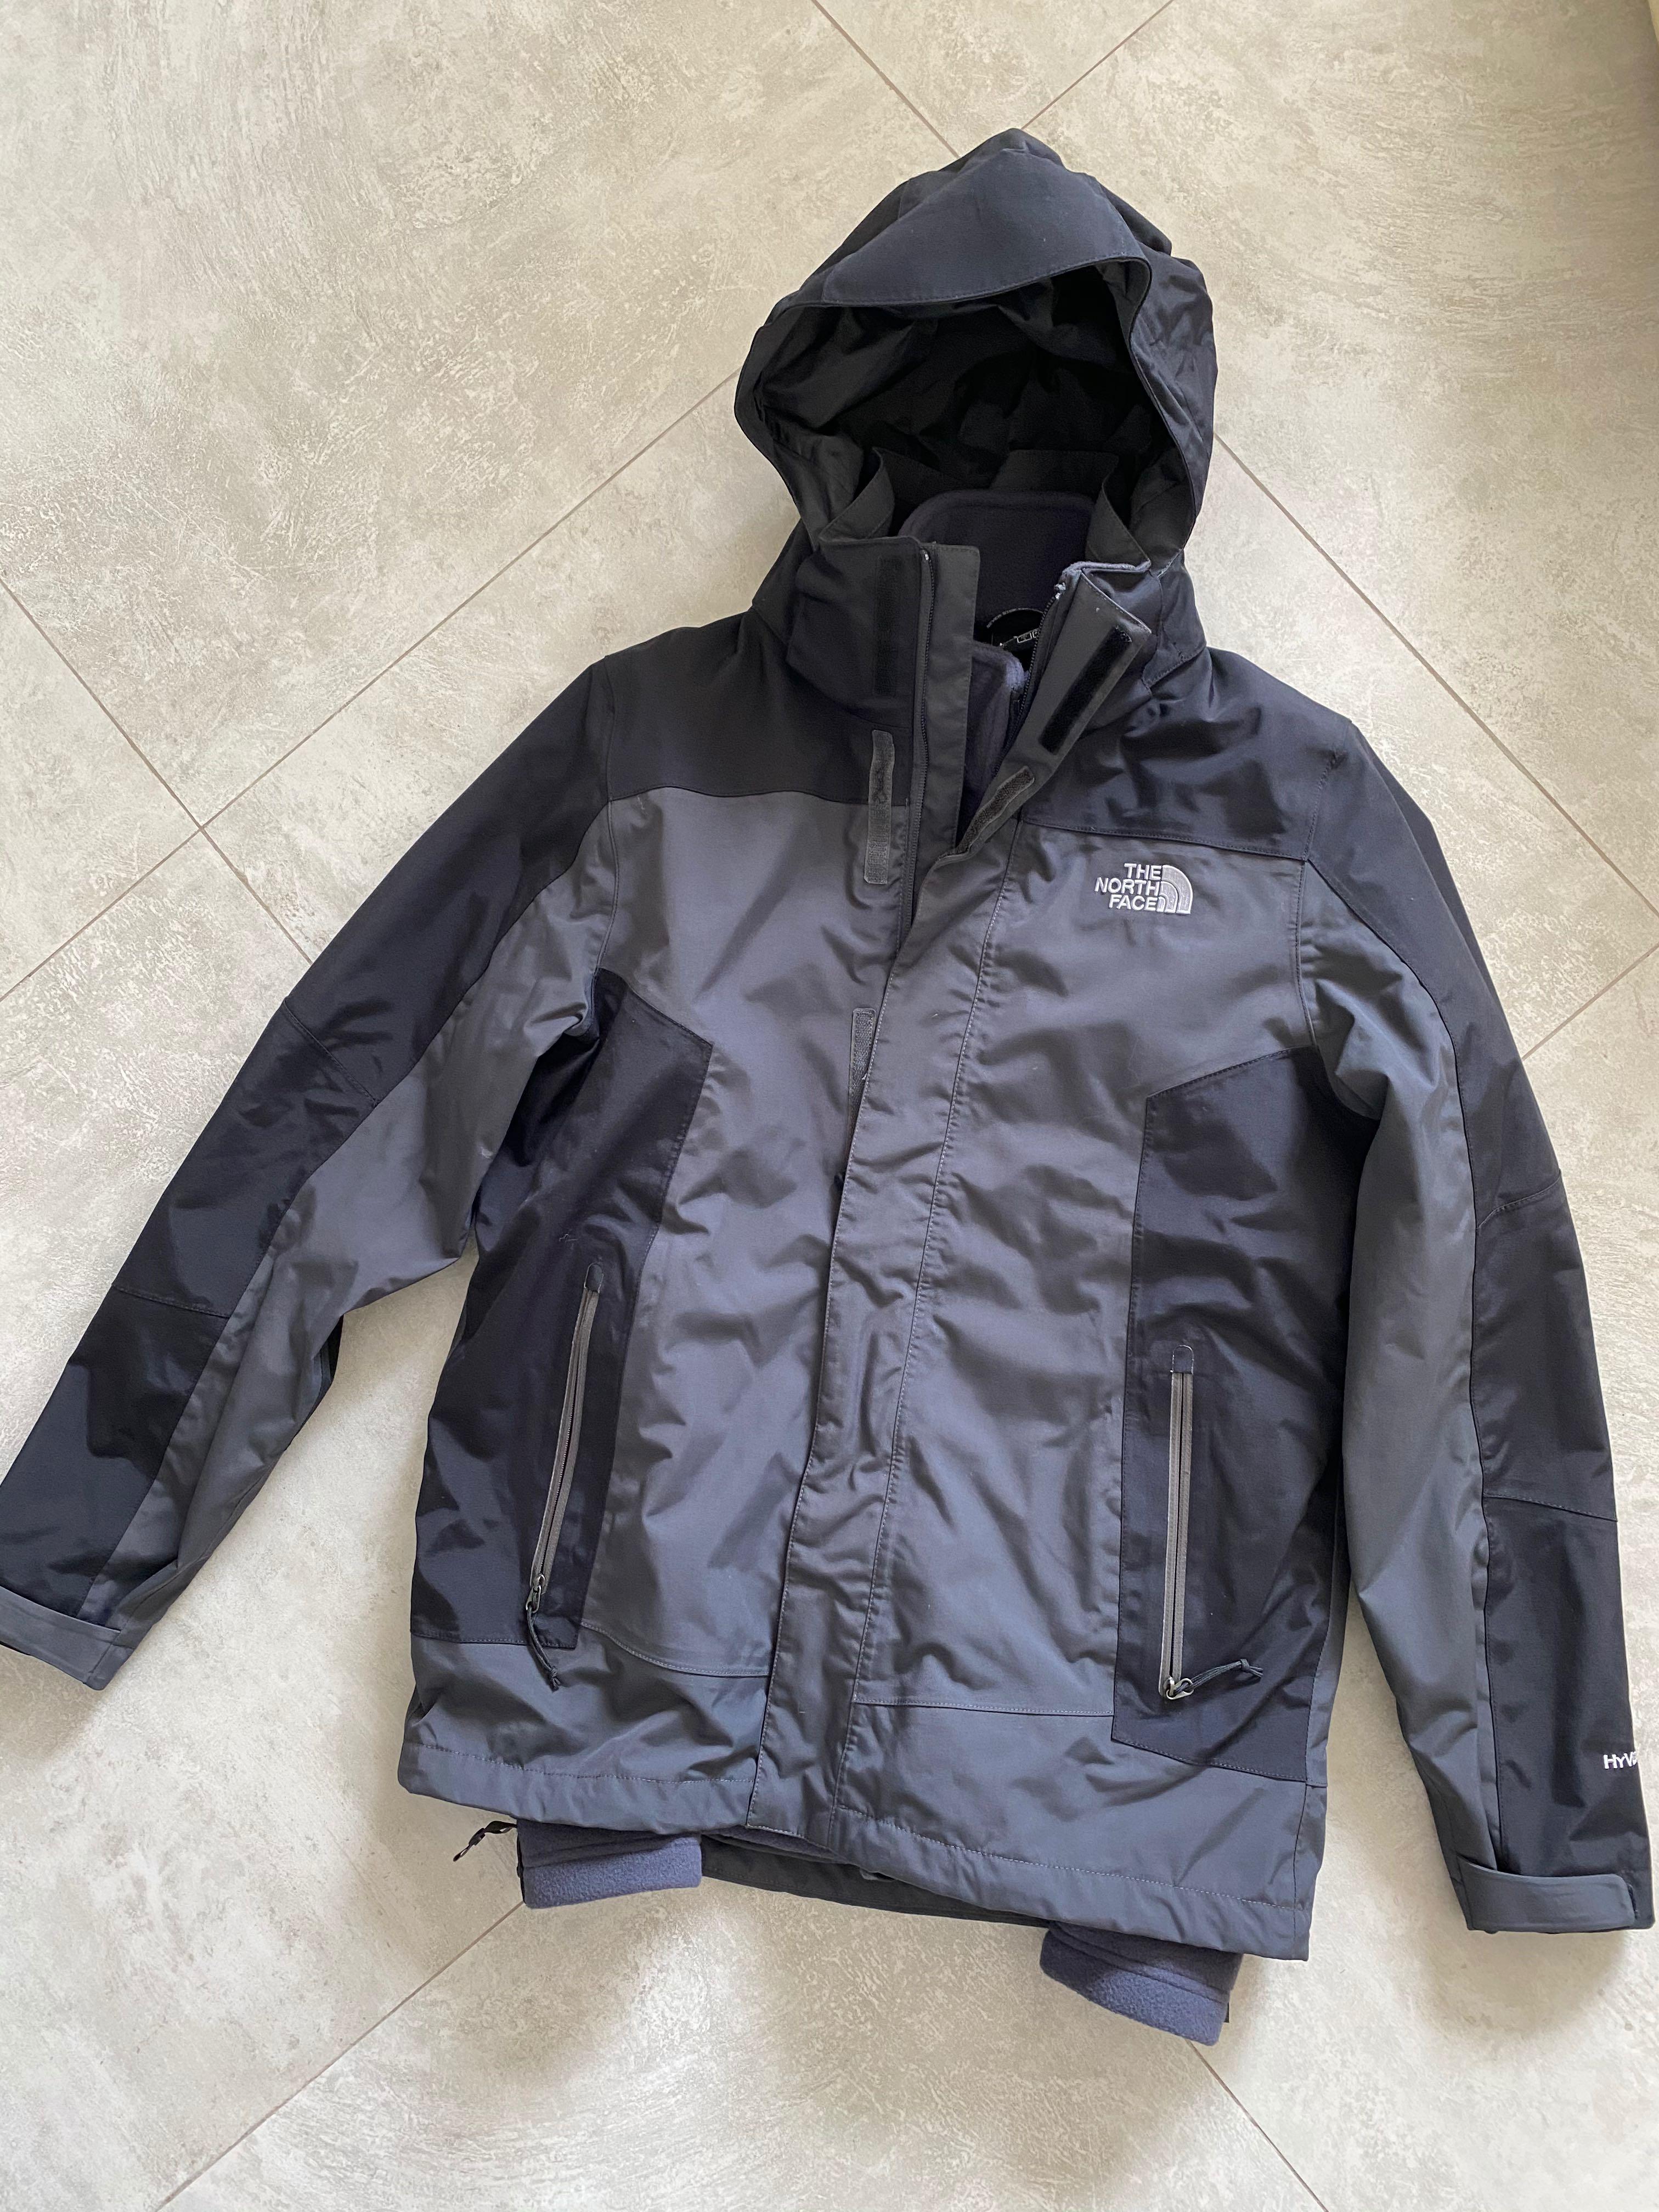 The North Face jacket with removable 